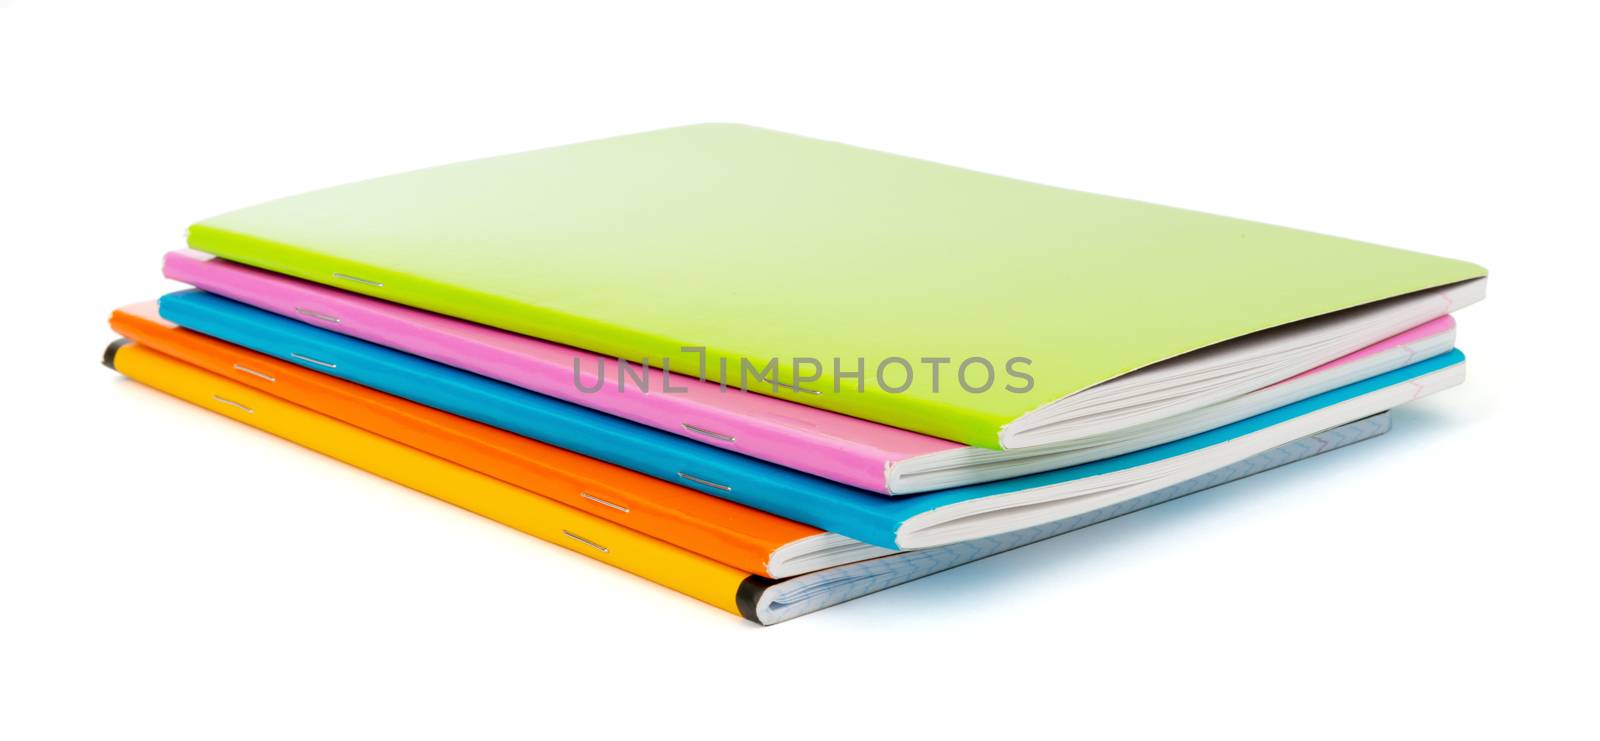 Pile of colorful copybooks on isolated white background